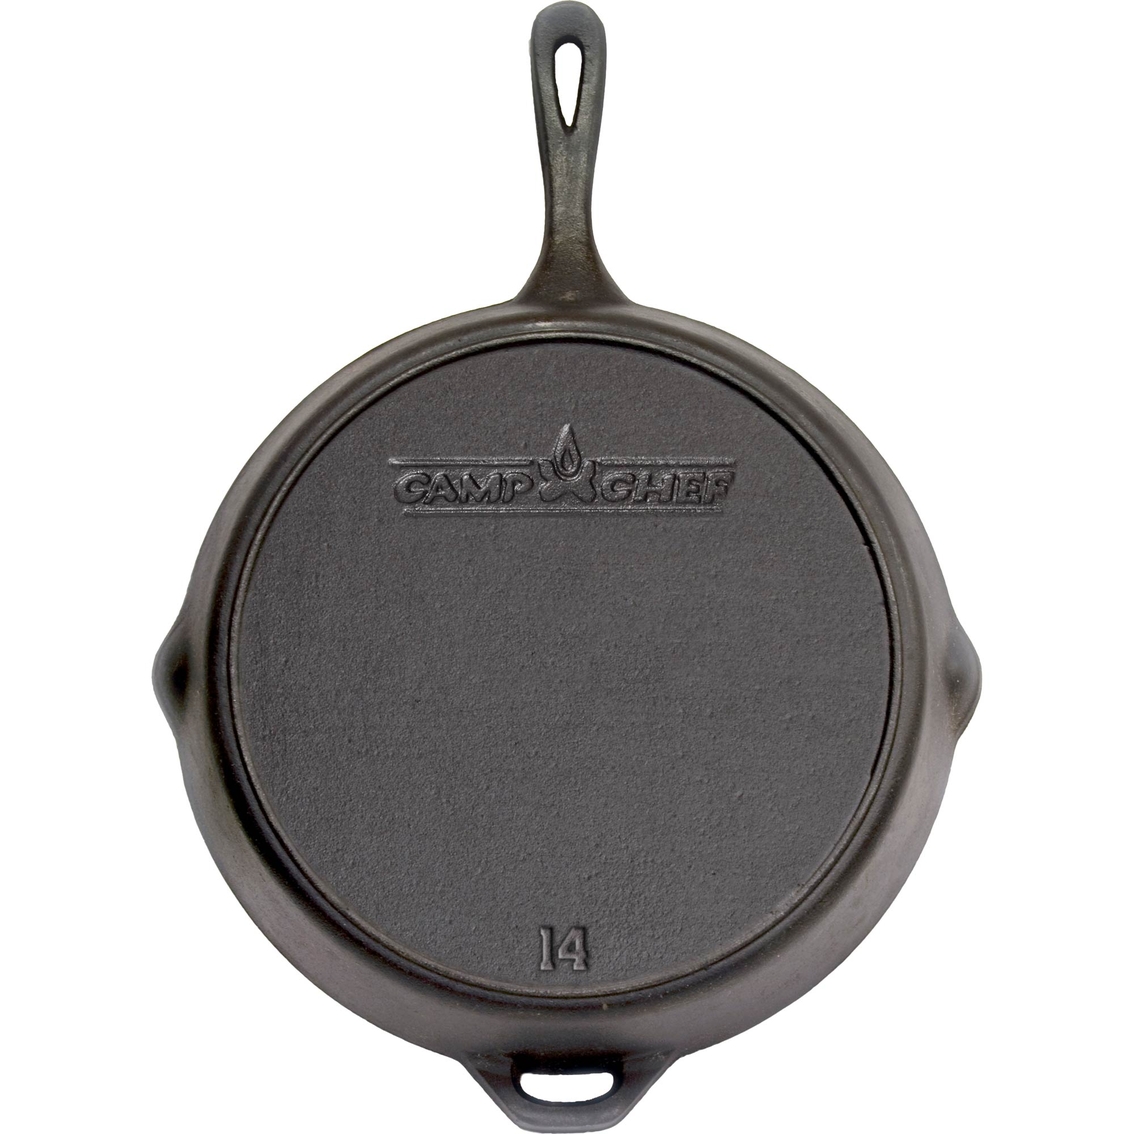 Camp Chef 14 in. Seasoned Cast Iron Skillet - Image 2 of 3